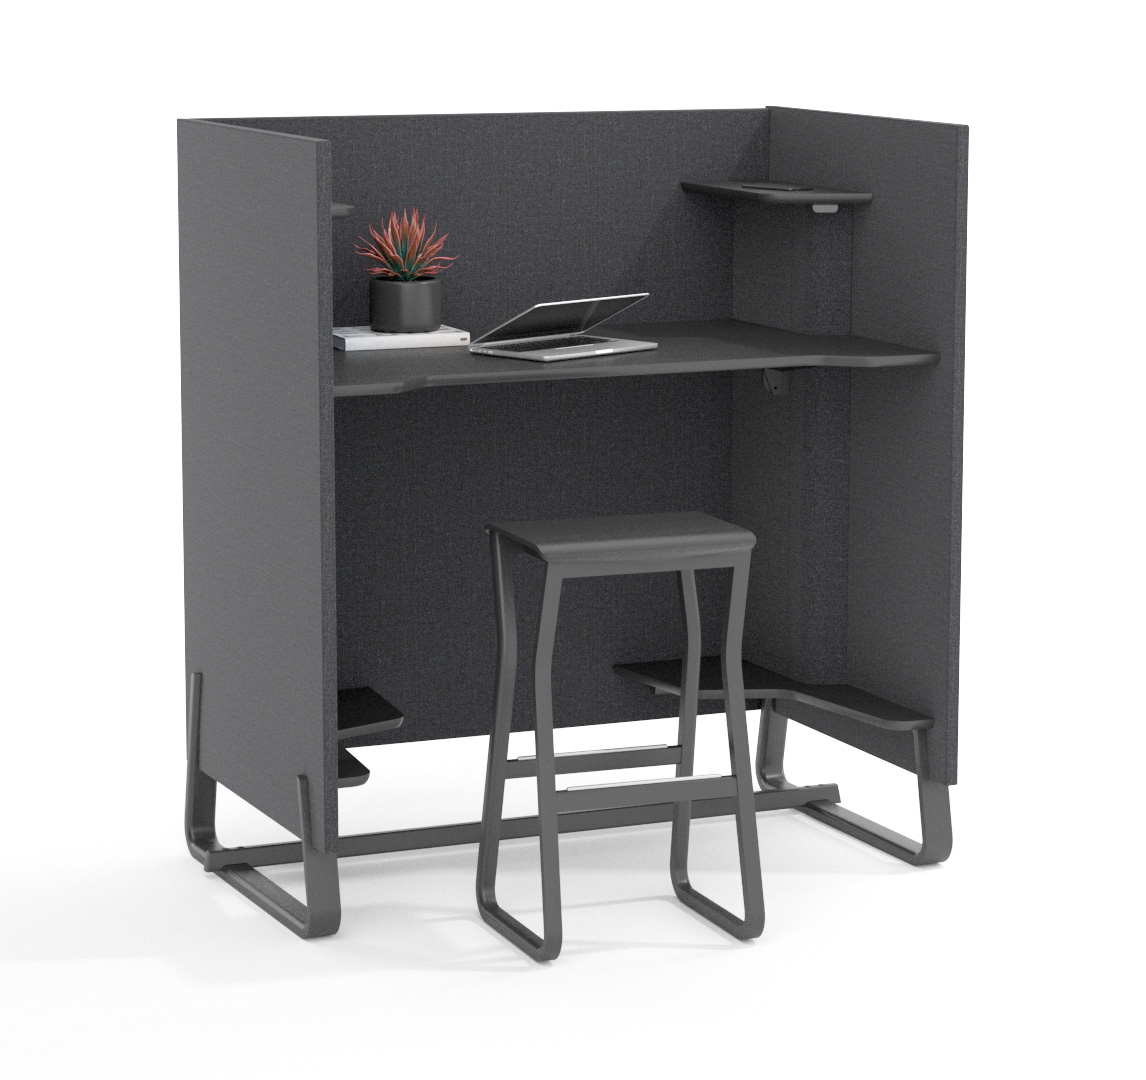 Black free-standing office booth with matching stool and cable management features.